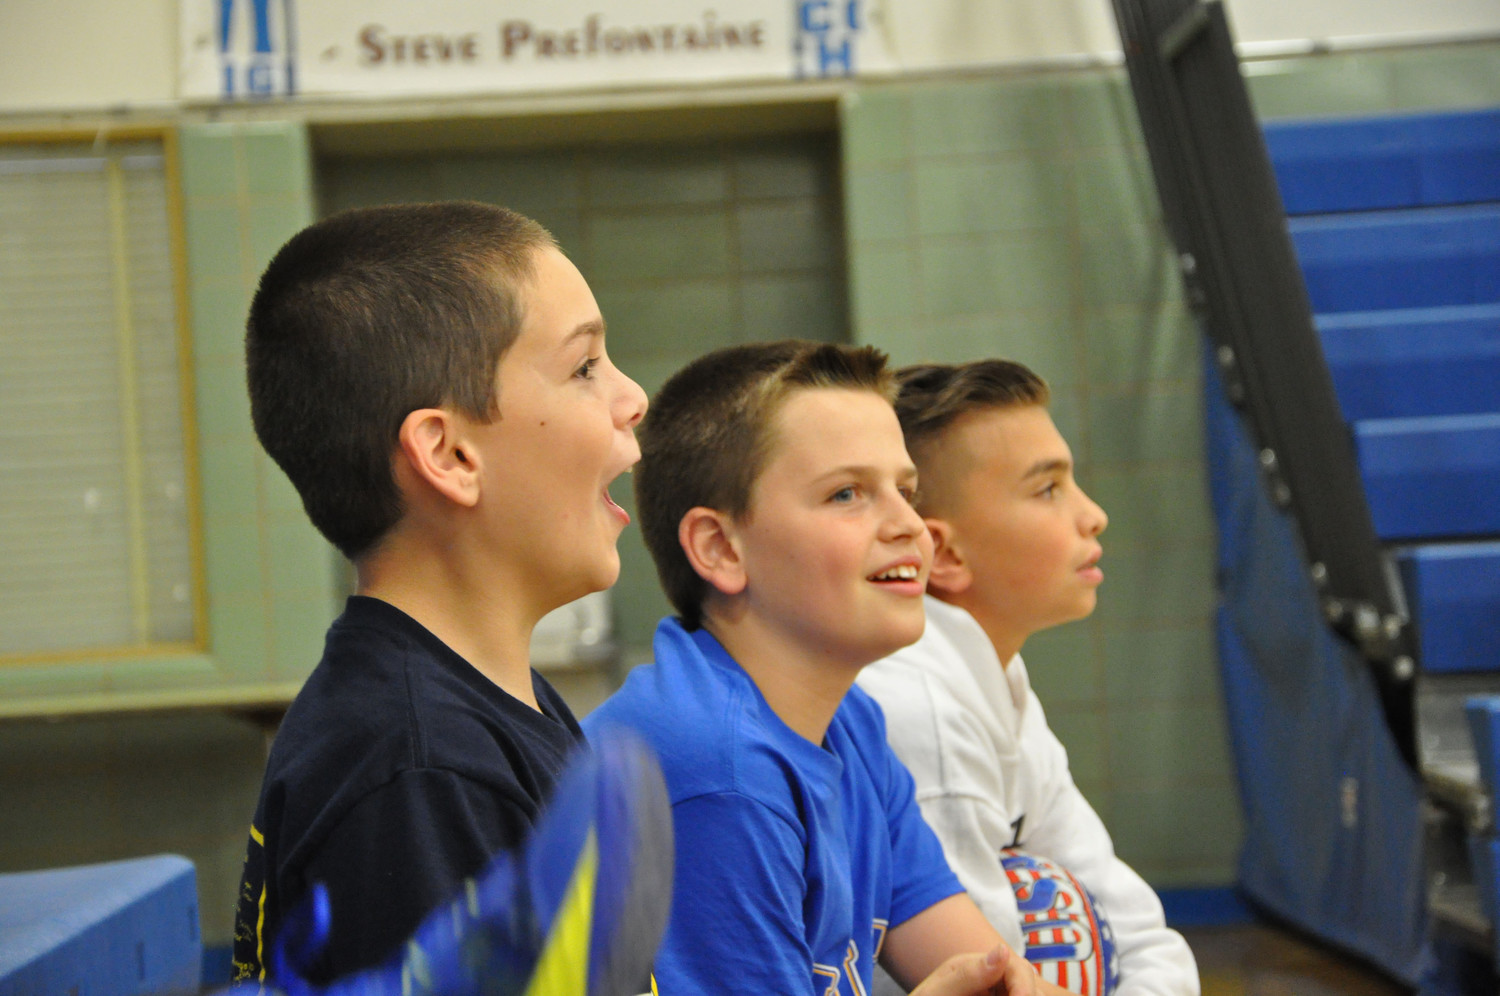 Patrick Crowe, left, Liam Glynn and Nicholas Decker enjoyed the game from the sidelines.